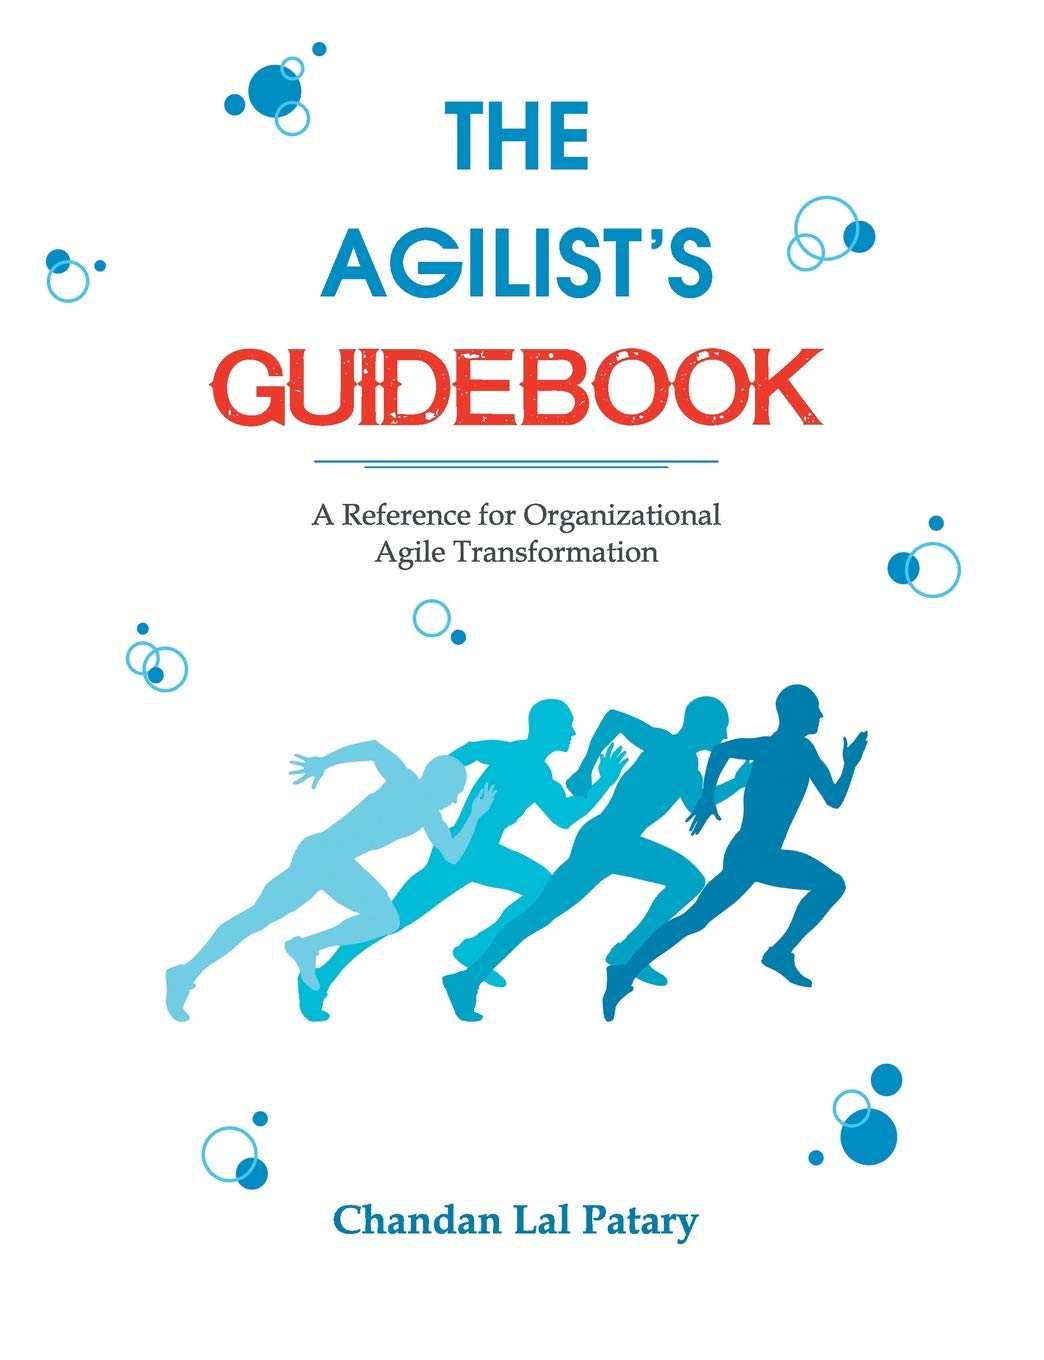 The Agilist's Guidebook - My First book